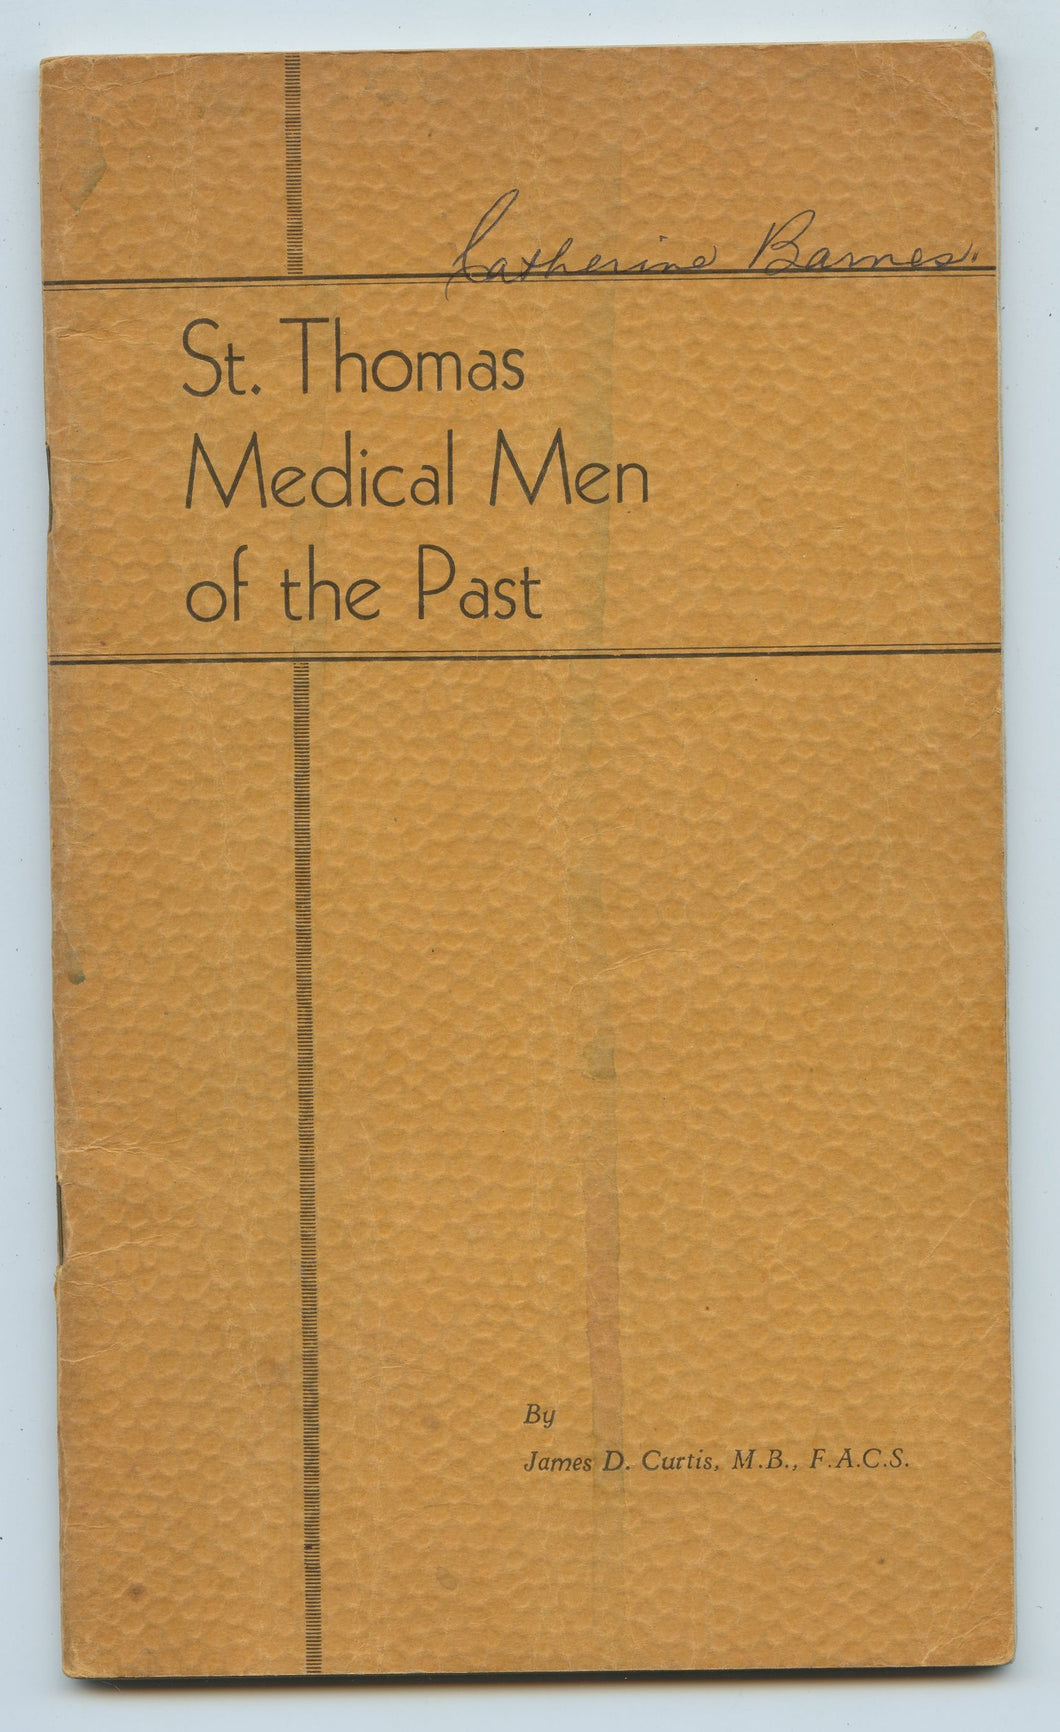 St. Thomas Medical Men of the Past